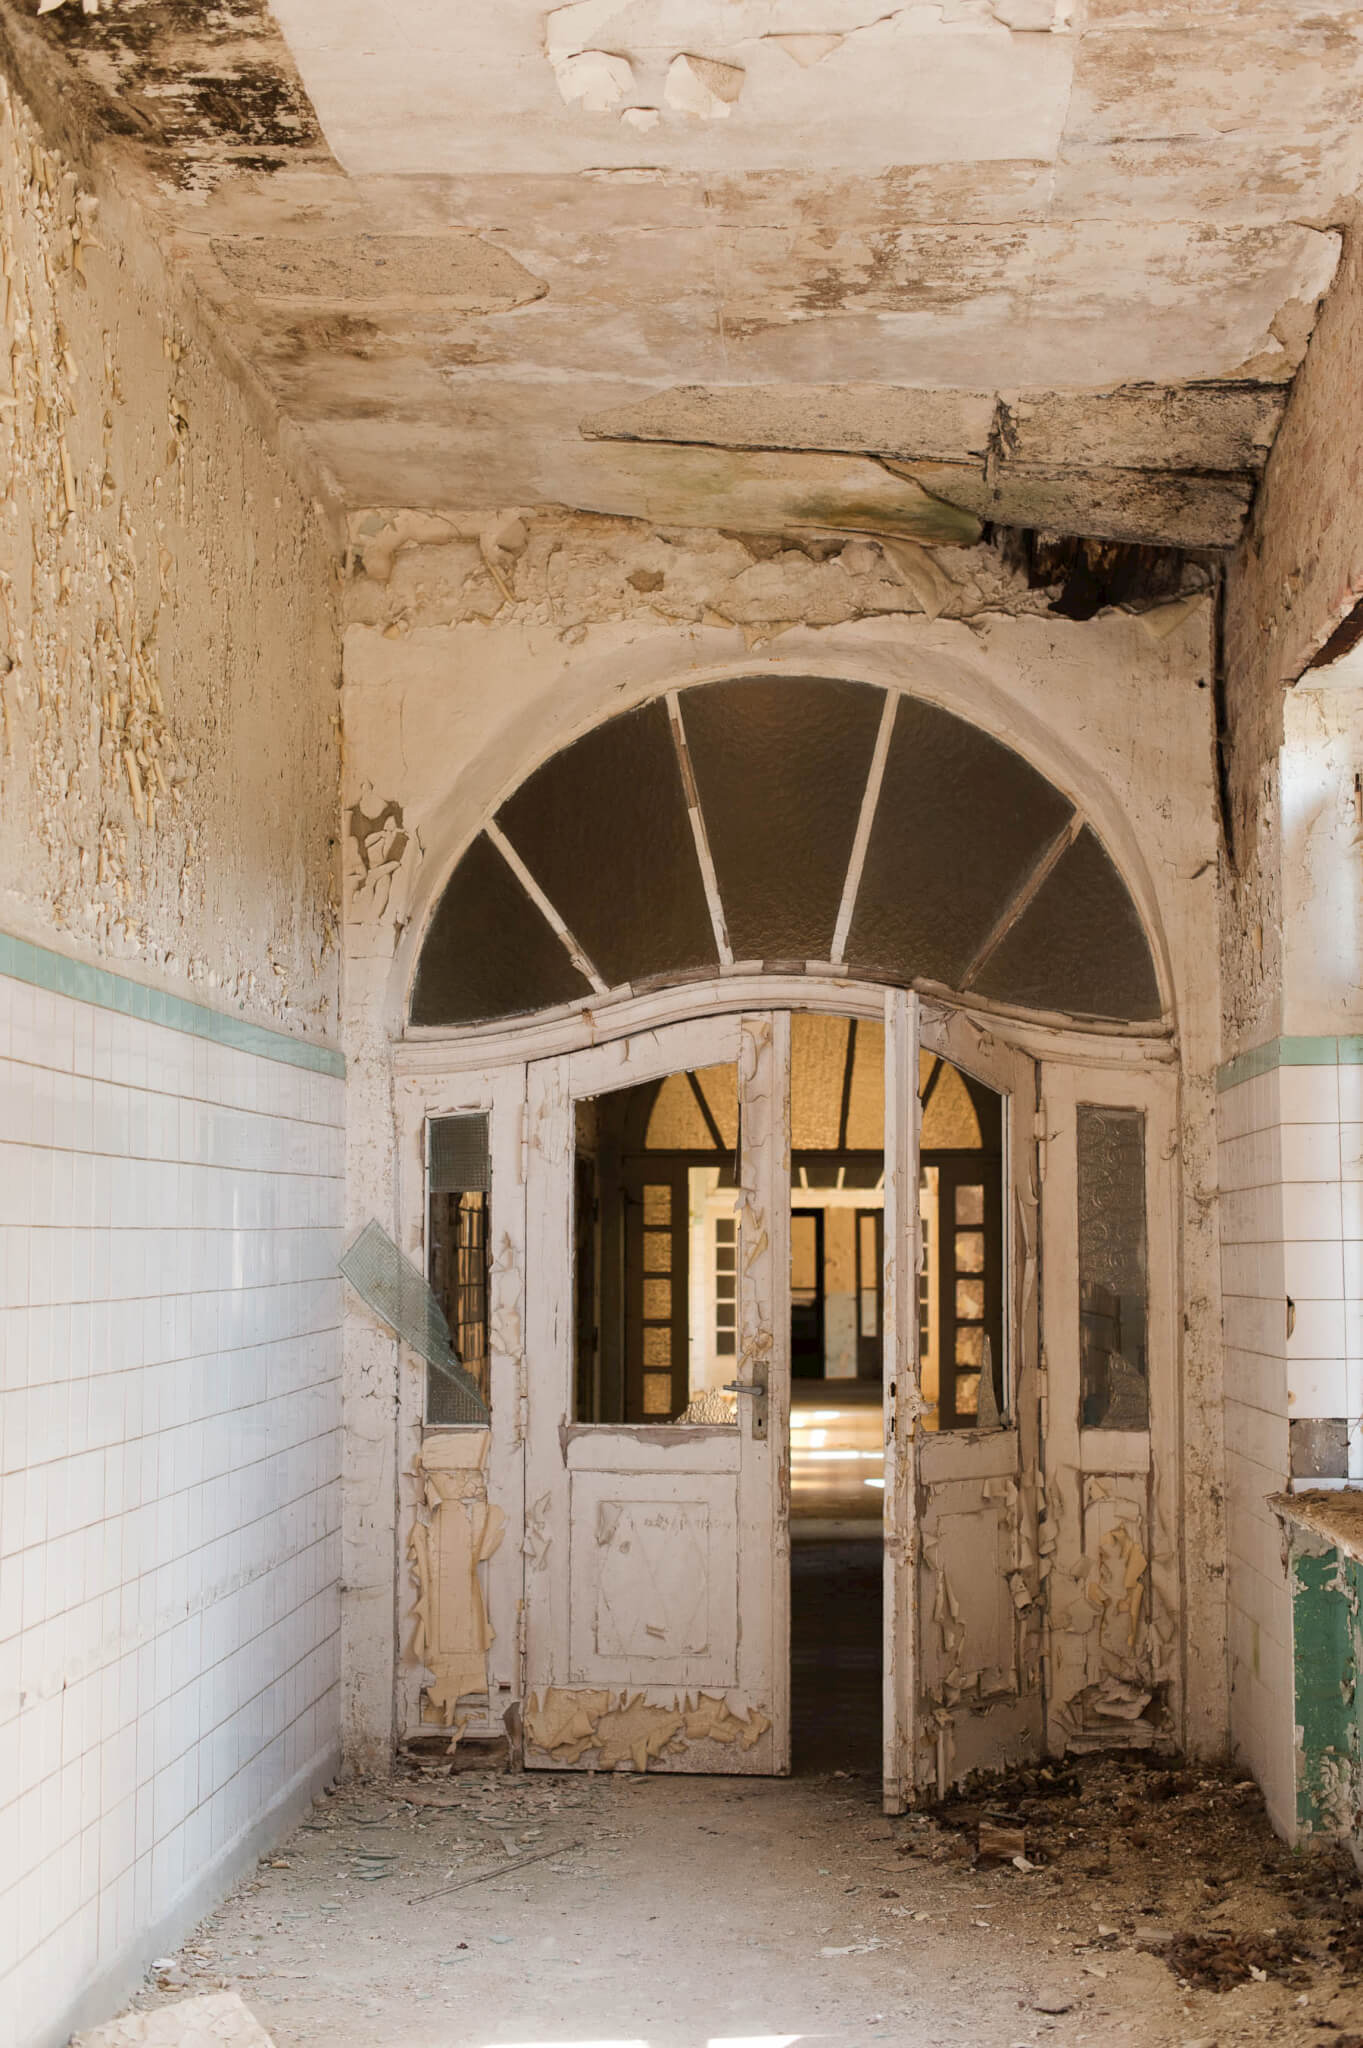 Decaying entrance to one of the Heilstätten Hohenlychen Sanatorium buildings in Lychen, Germany. Photographs by Berlin Portrait Photographer Briana Morrison